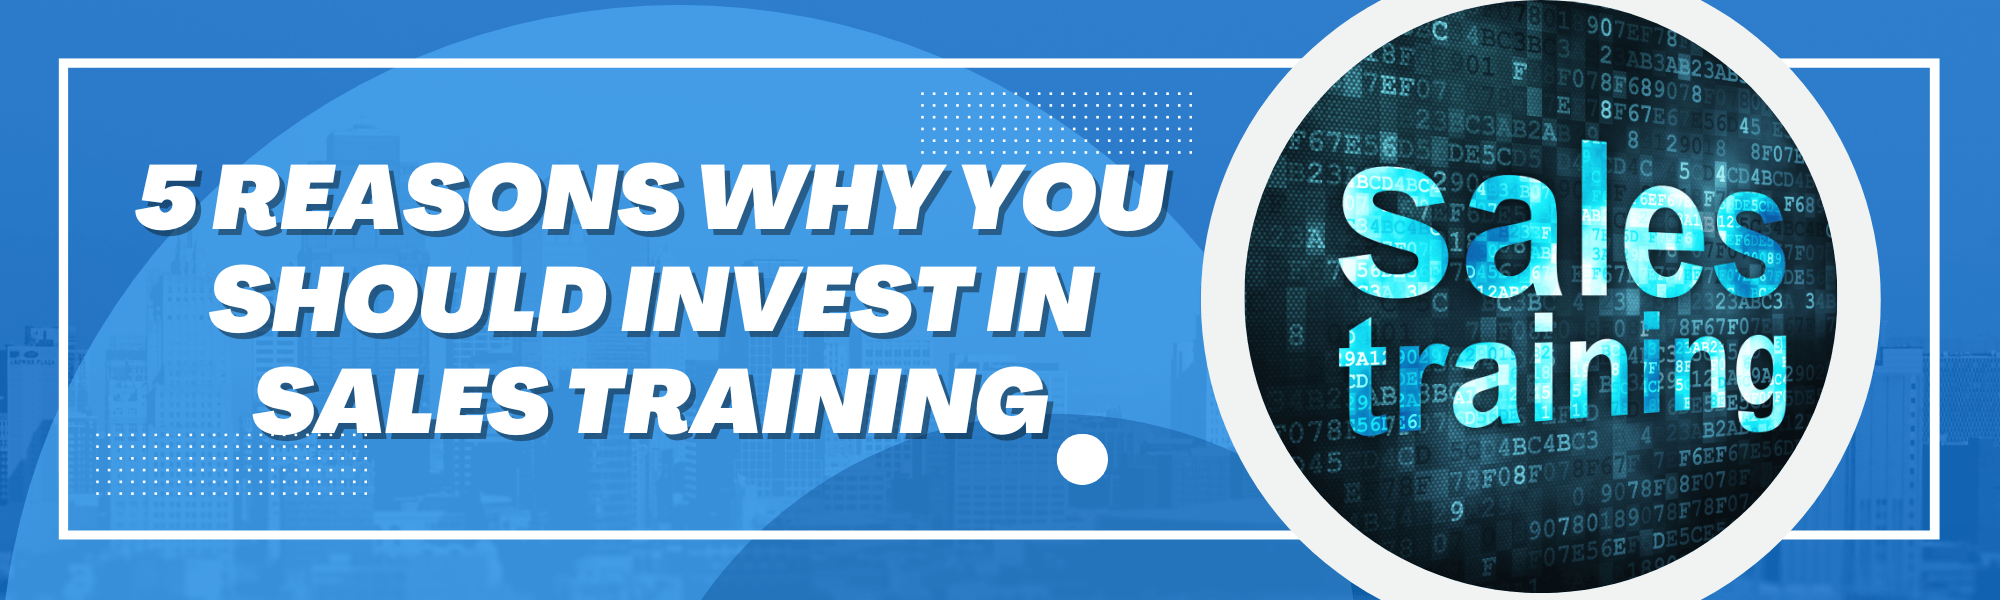 5 Reasons Why You Should Invest in Sales Training